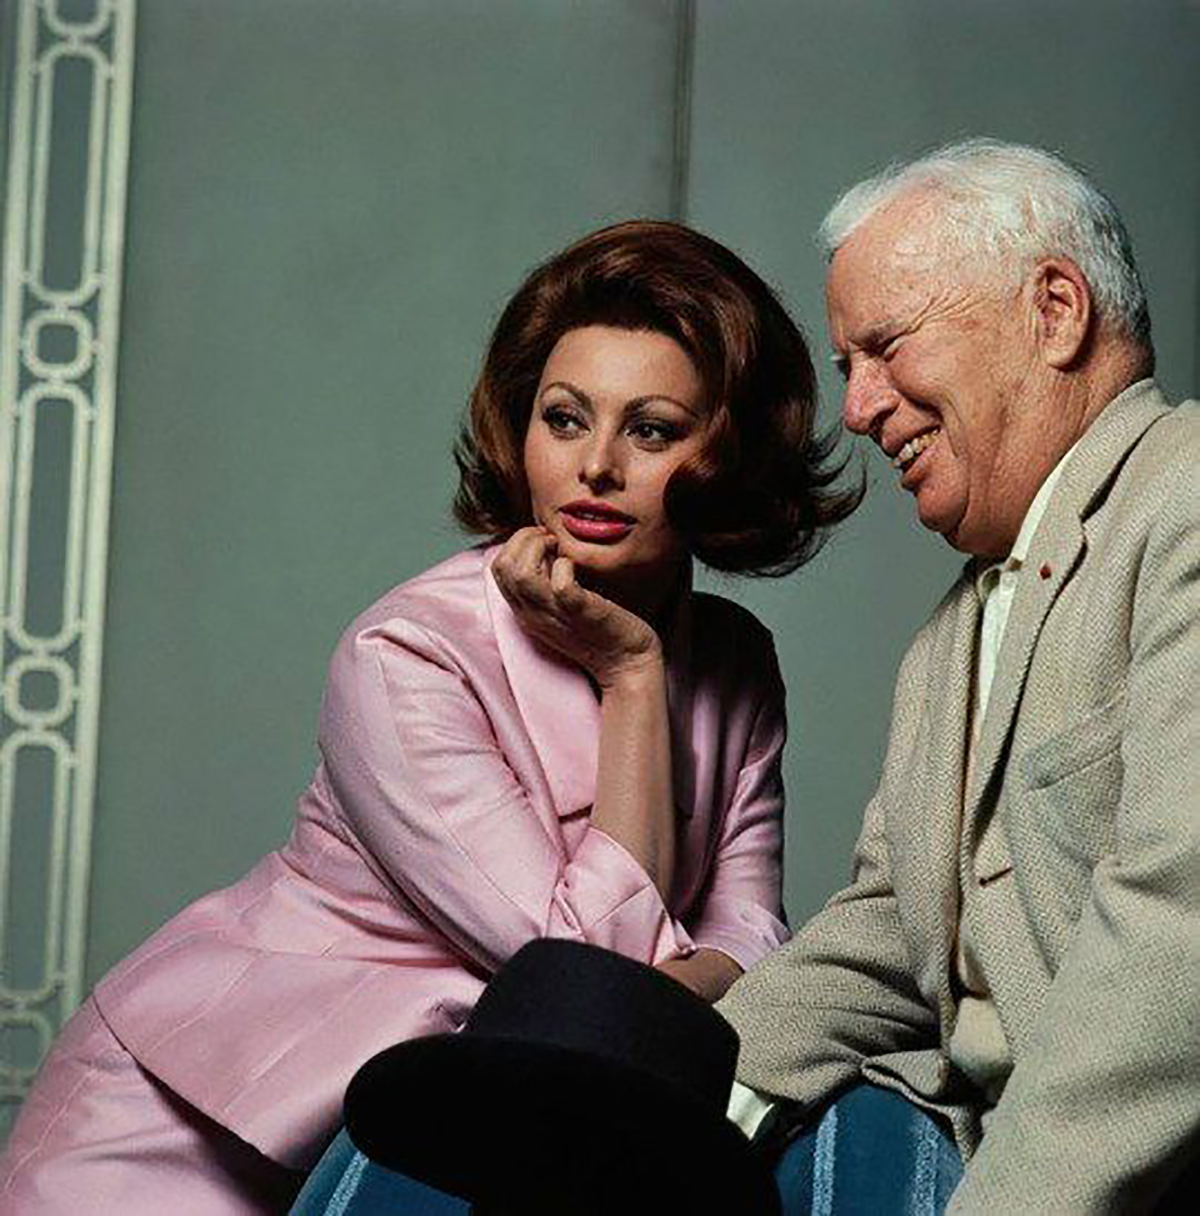 Sofia Loren and Charlie Chaplin promoting the film A Countess From Hong Kong (1967).